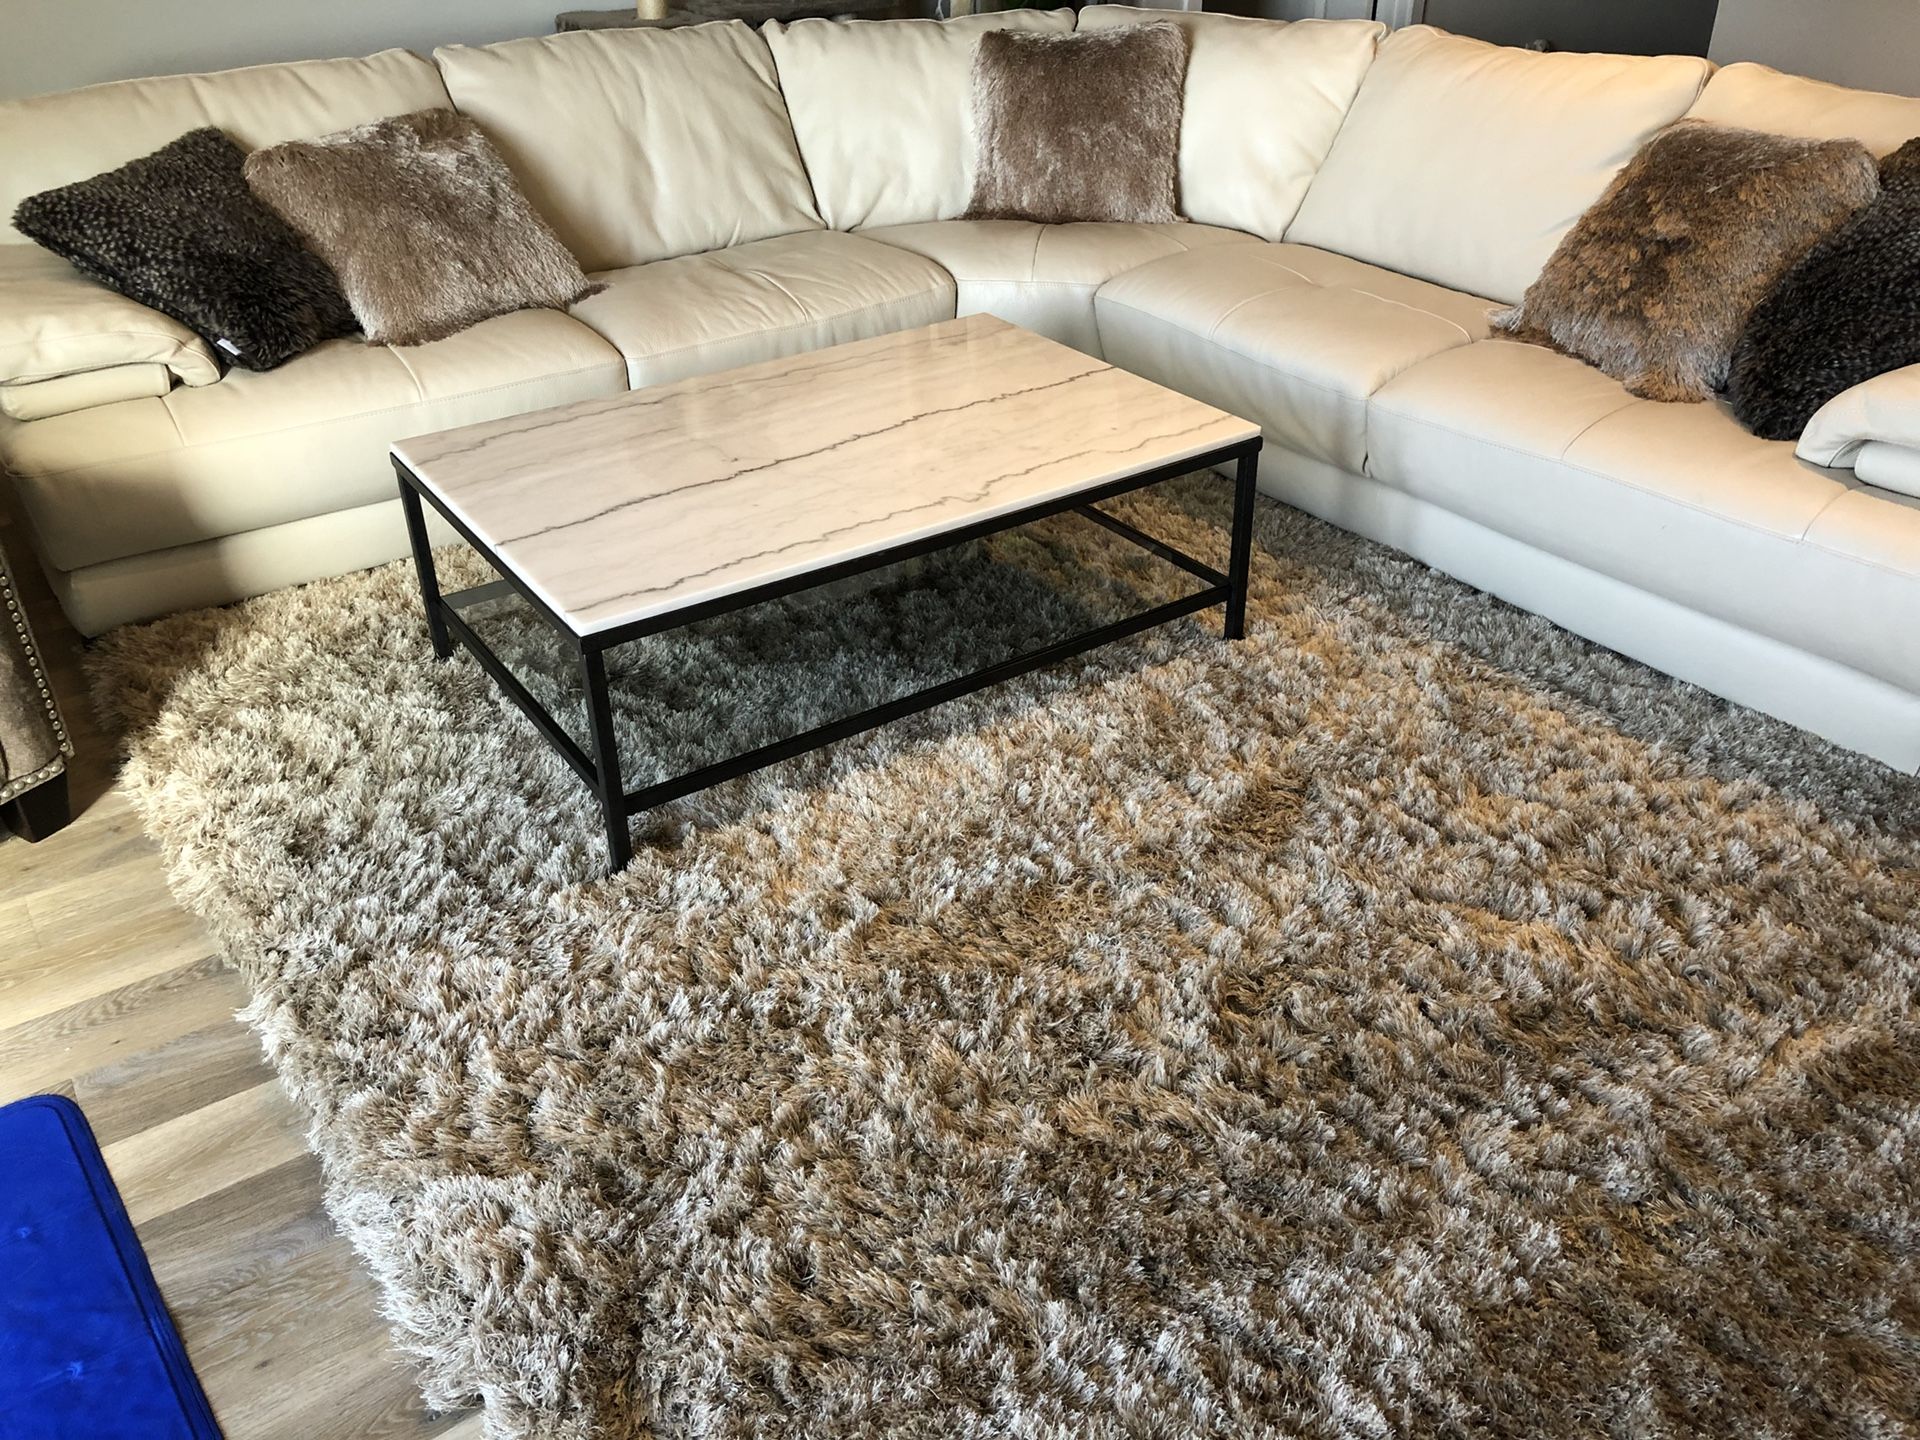 For Sale - Coffee & End Table - Macy’s Stratus Collection marble, glass & rubbed-bronze frame finish. Like new, purchased in 2017...Beautiful finish